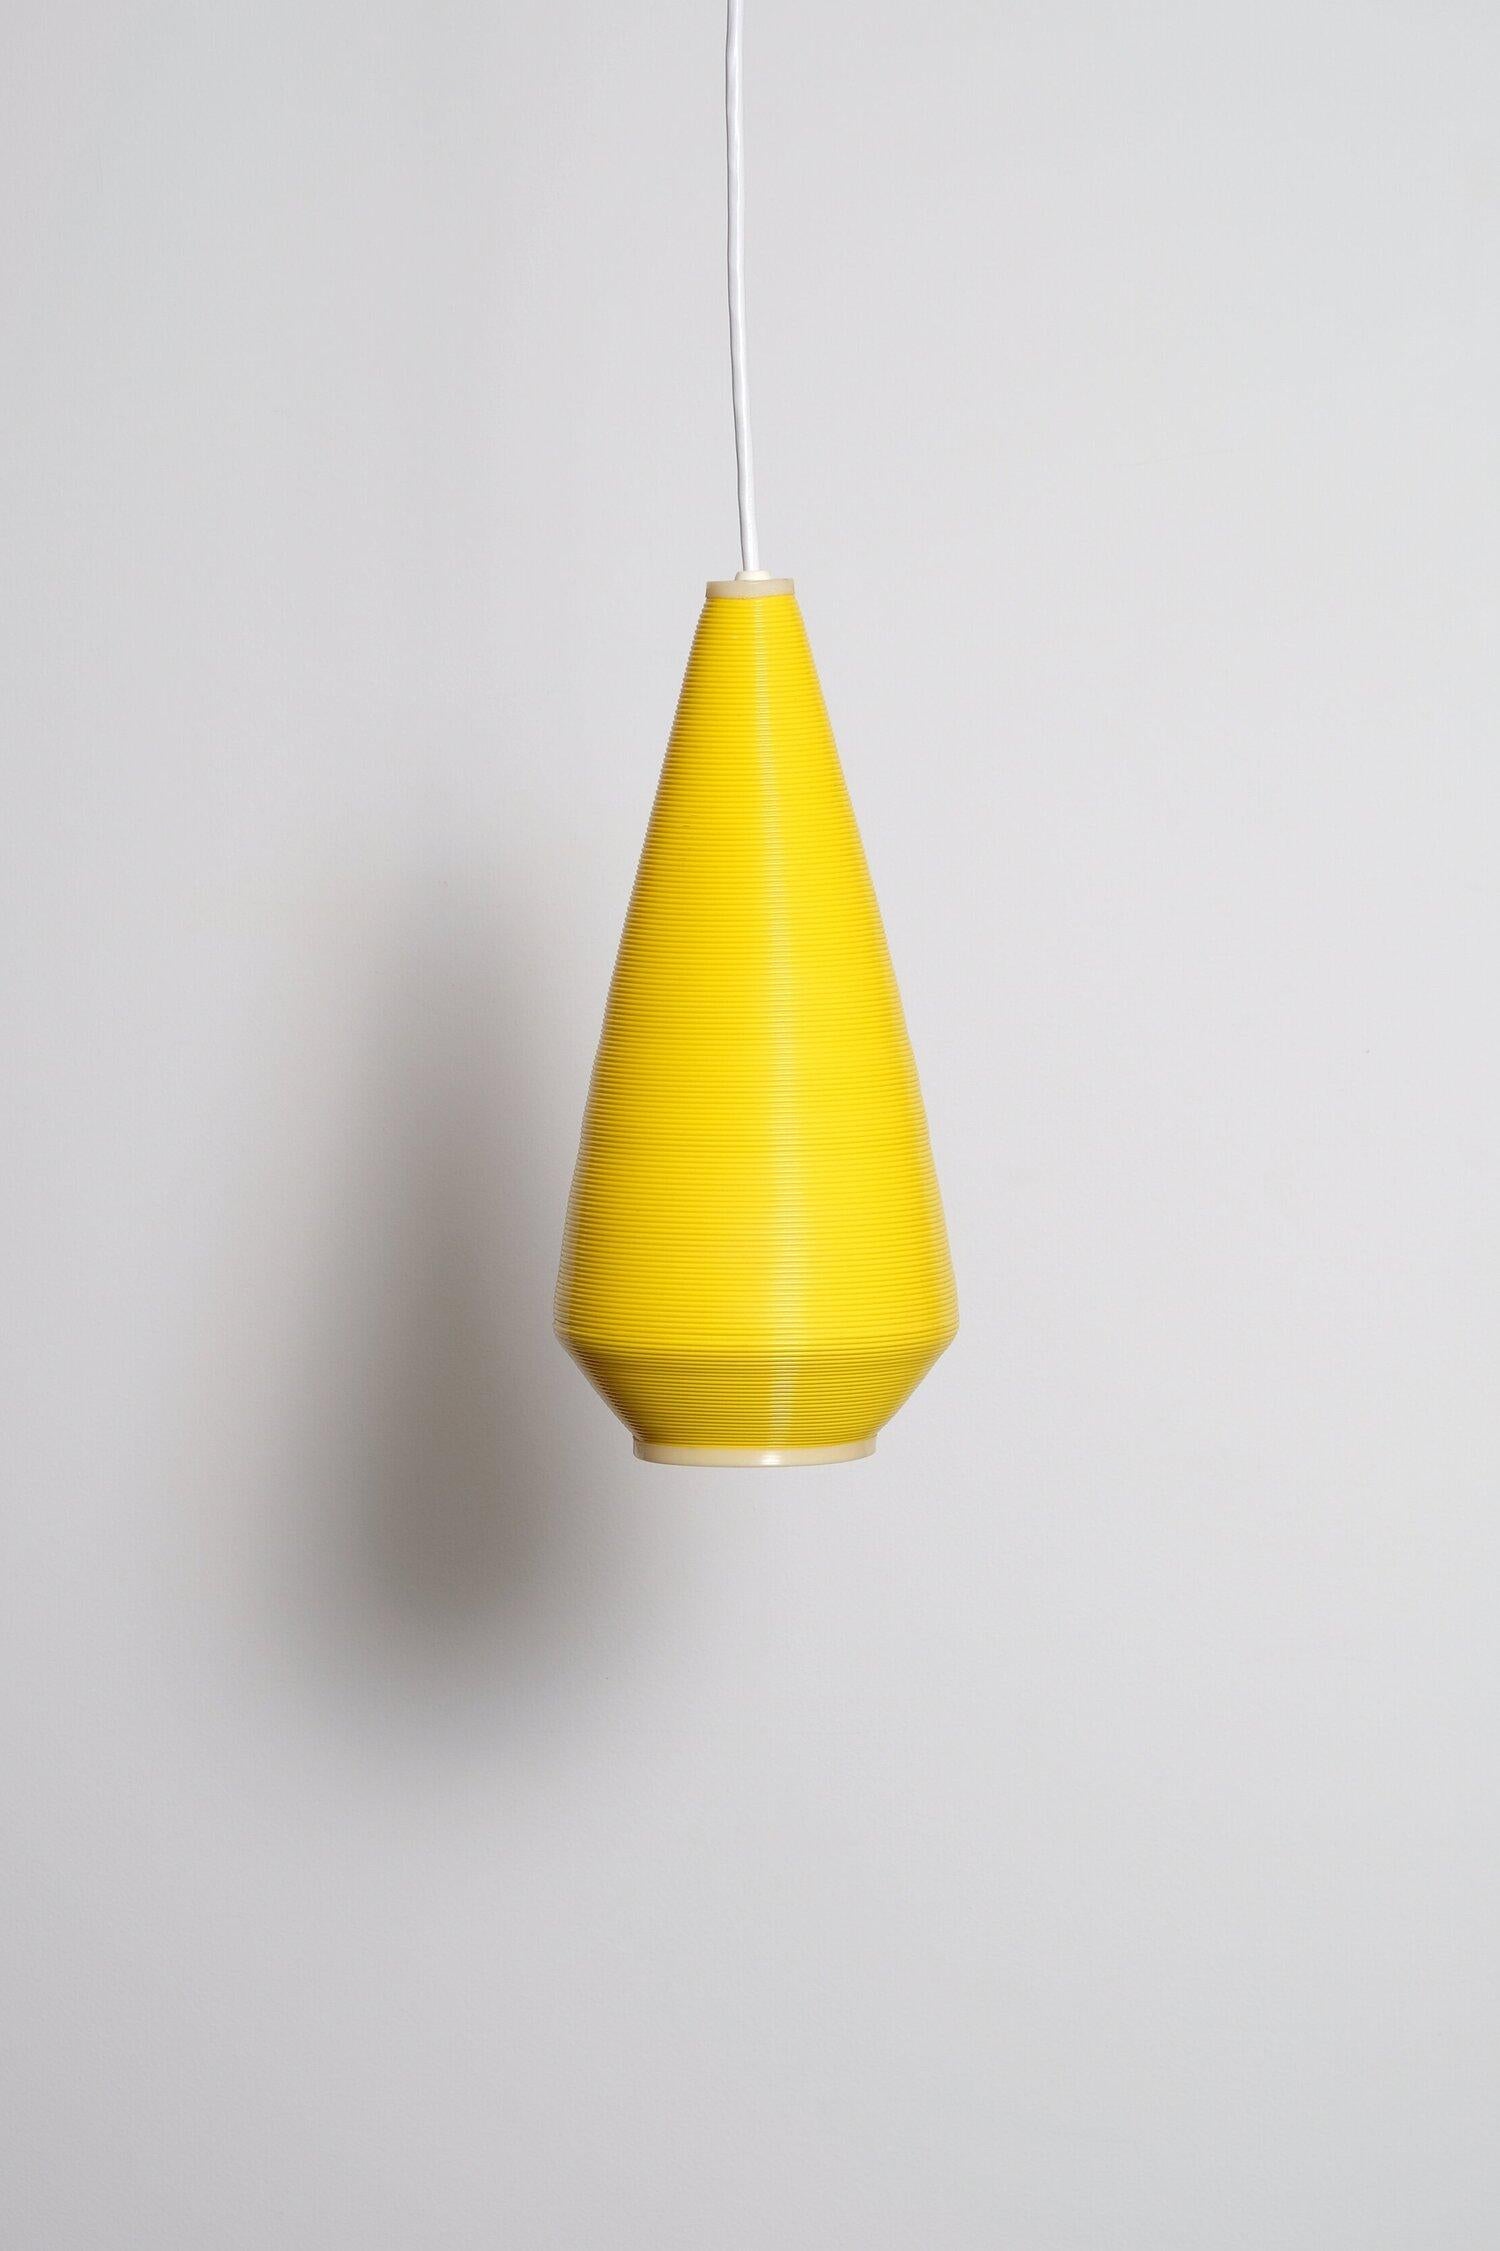 Stunning Rotaflex pendant by John and Sylvia Reid manufactured in the UK in the 1960’s. 60 to 100 watt E-26 Edison medium base incandescent bulb or higher if LED/CFL. Original E-26 Edison medium base sockets and new 18/2 round white plastic cord.